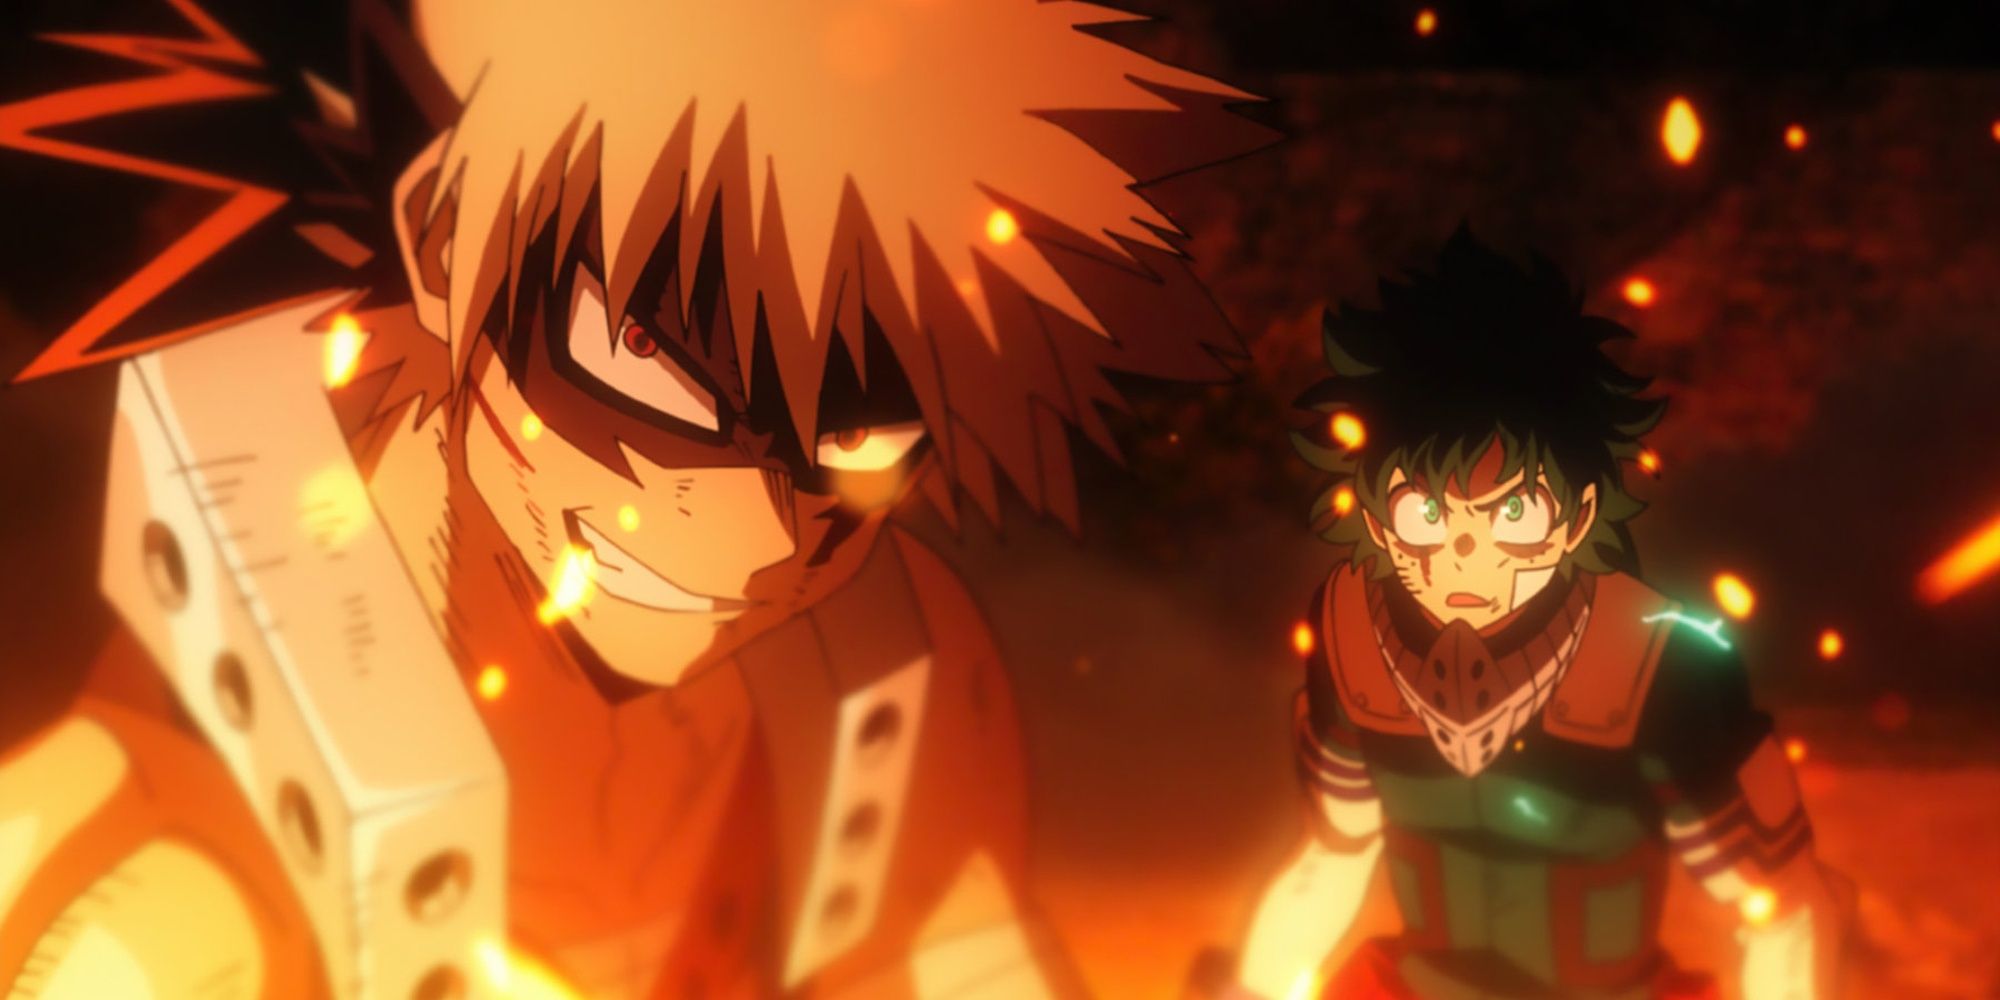 Deku and Bakugo during the climactic battle of Heroes Rising.